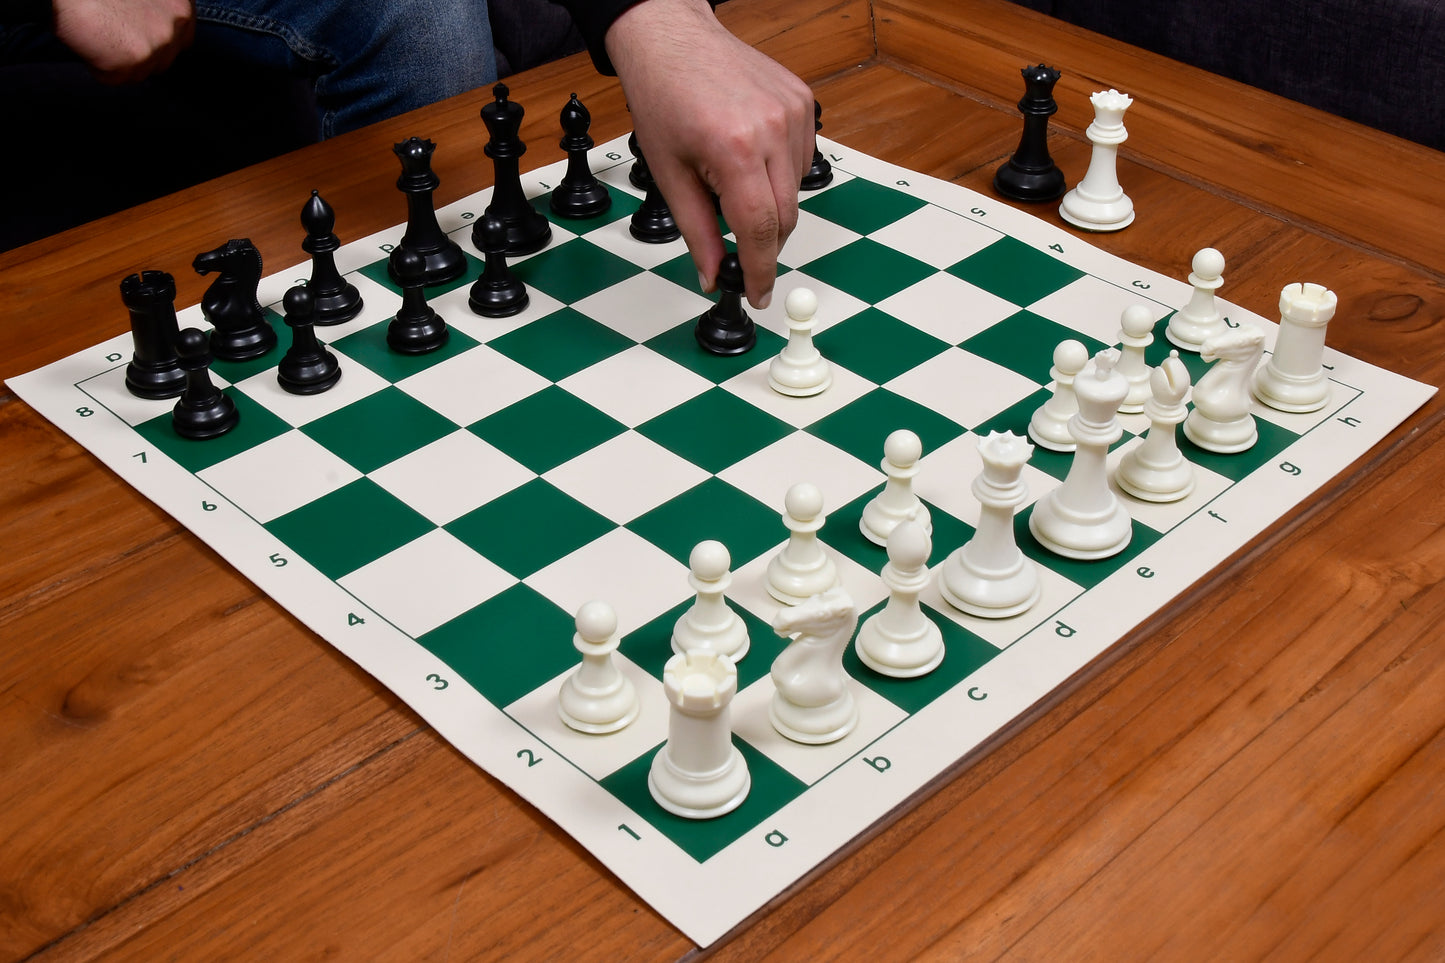 The Professional Staunton Series Tournament Chess Pieces Sets in Black Dyed & Ivory White Solid Plastic - 3.75" King